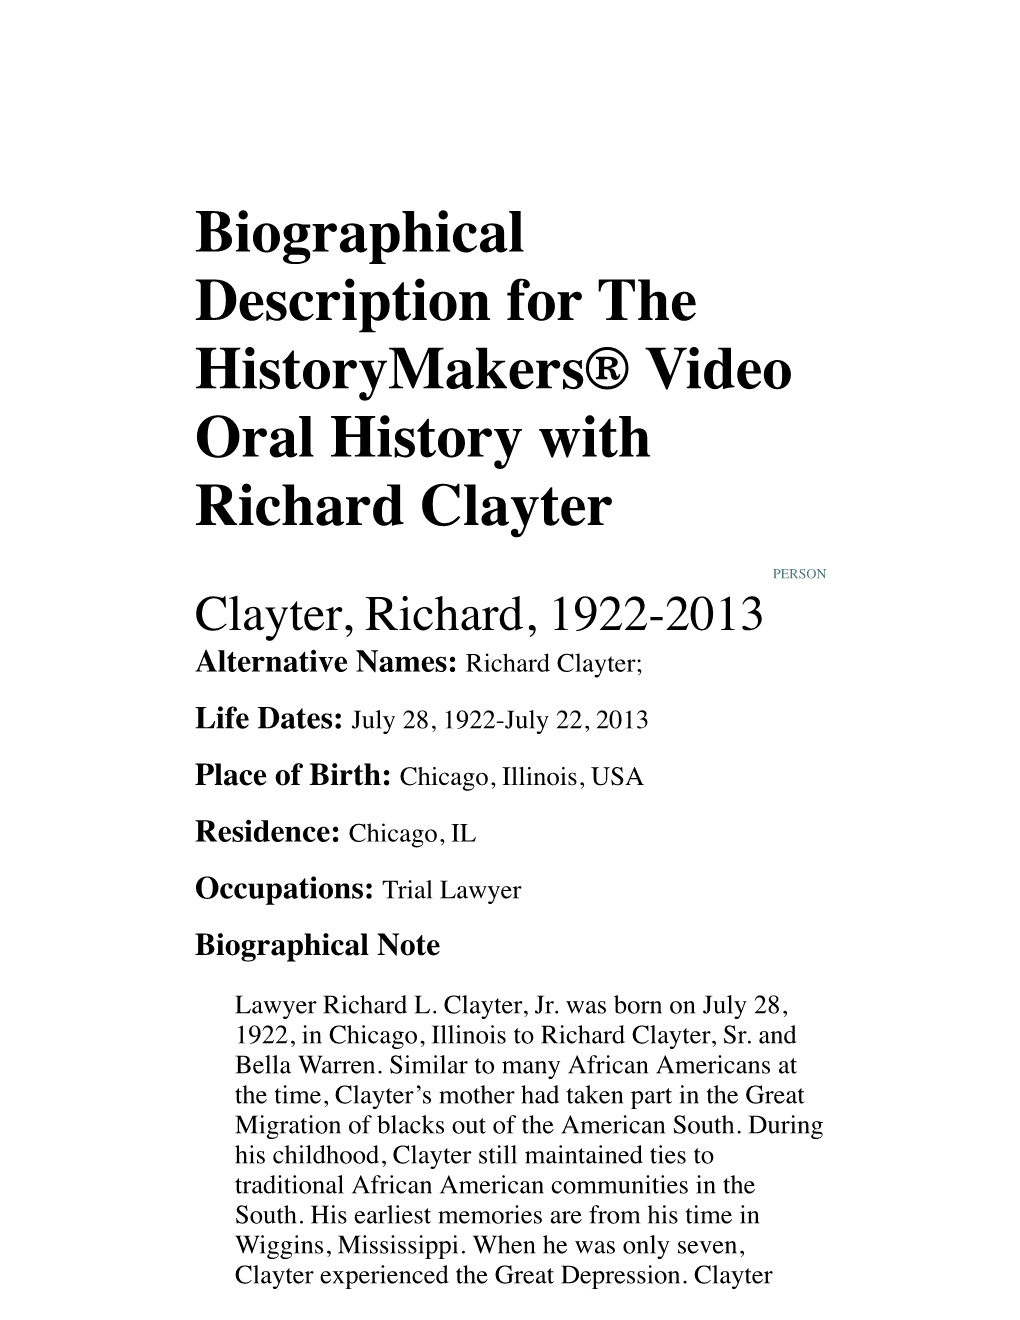 Biographical Description for the Historymakers® Video Oral History with Richard Clayter